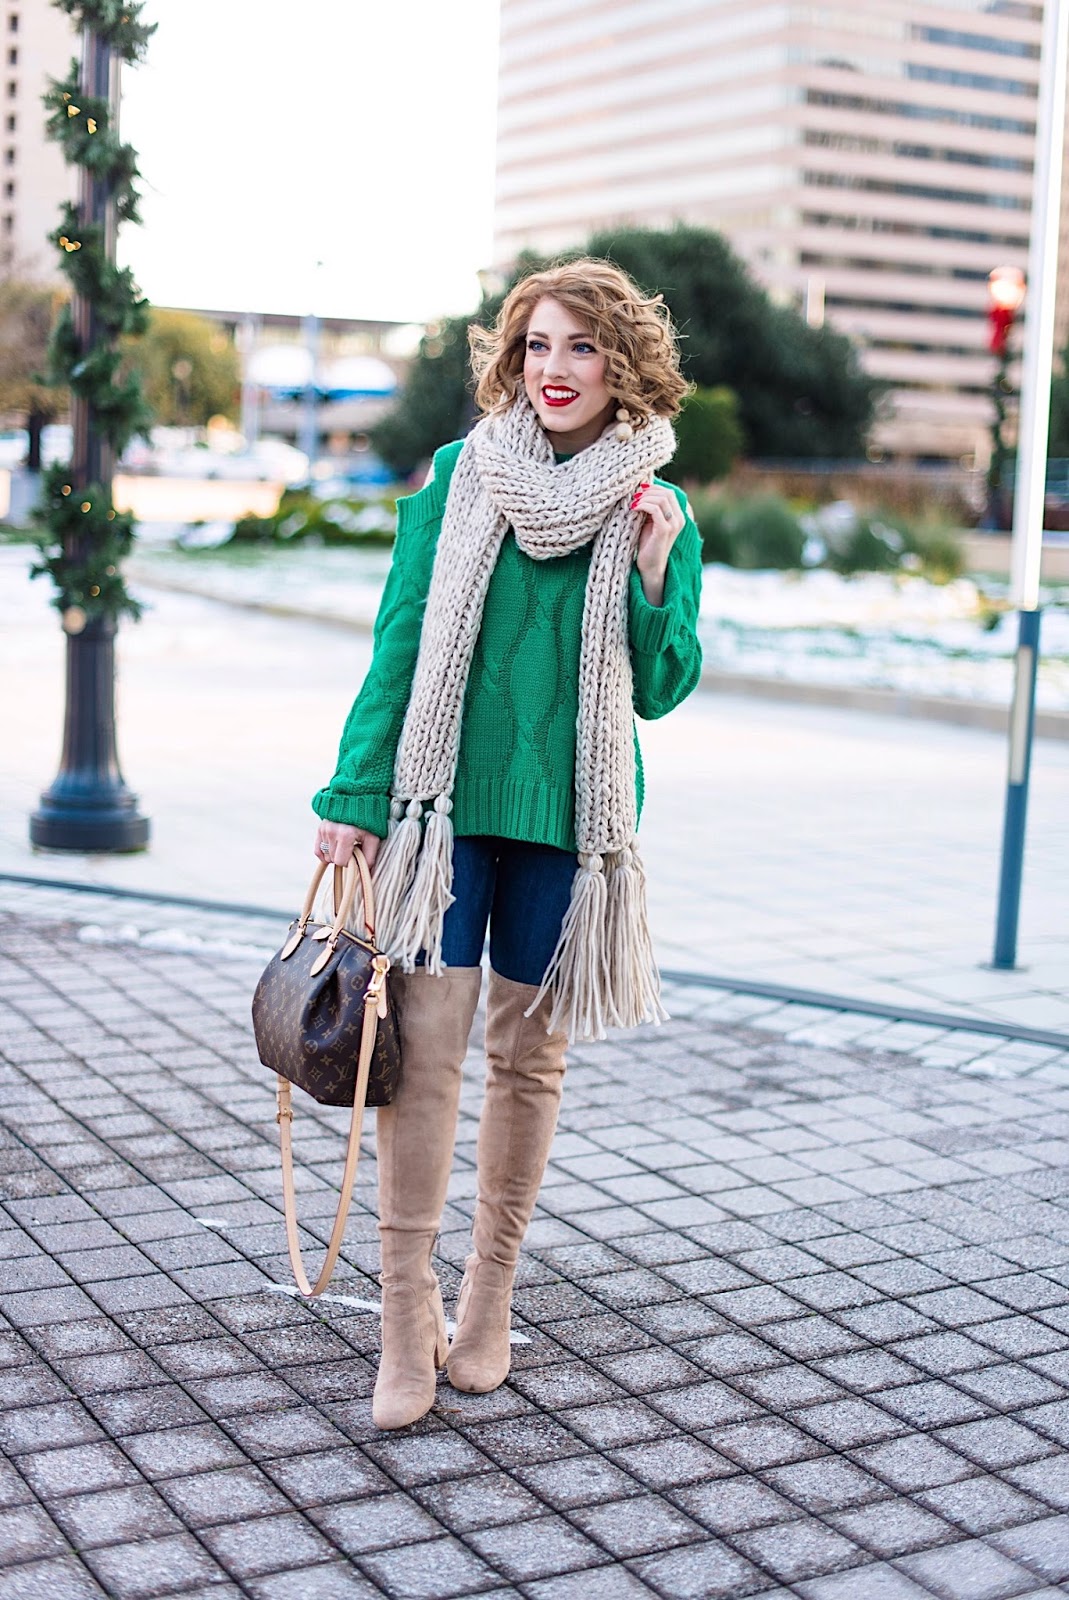 Winter Fashion: Cable Knit Sweater & OTK Boots - Something Delightful Blog